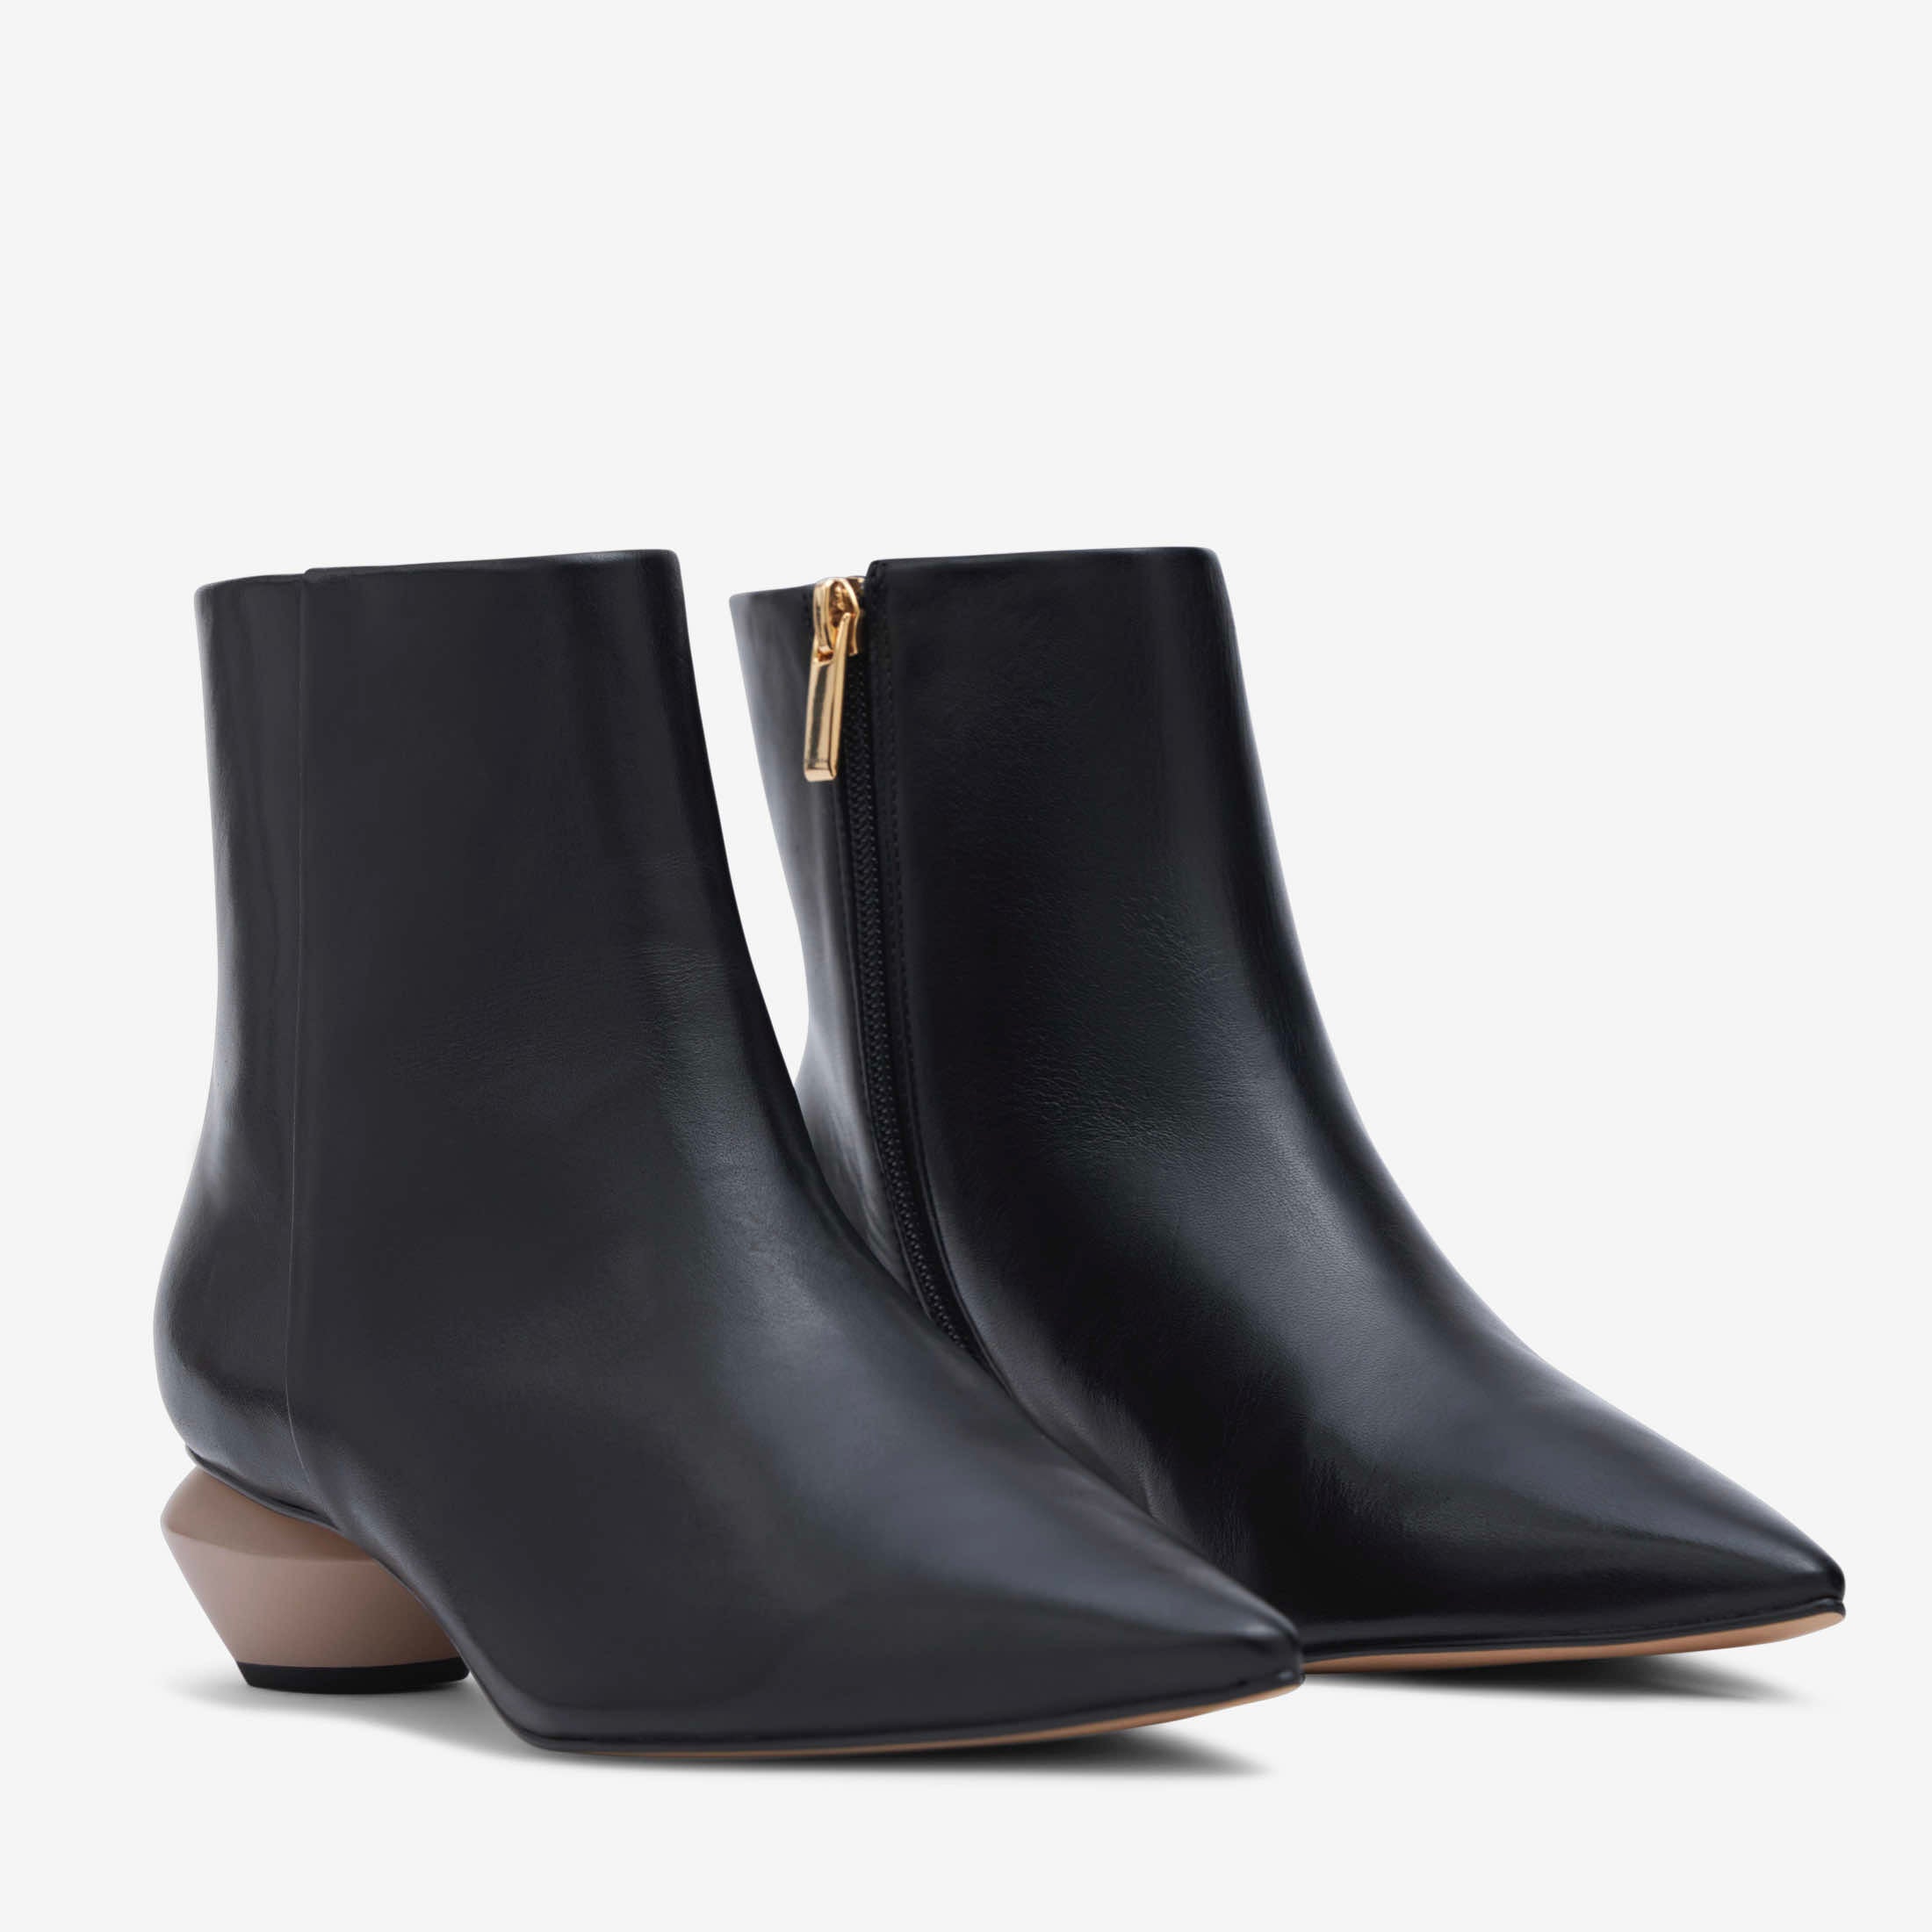 Loeffler Randall | Thandy Black Curved Heel Bootie I Ankle Boots I Footwear